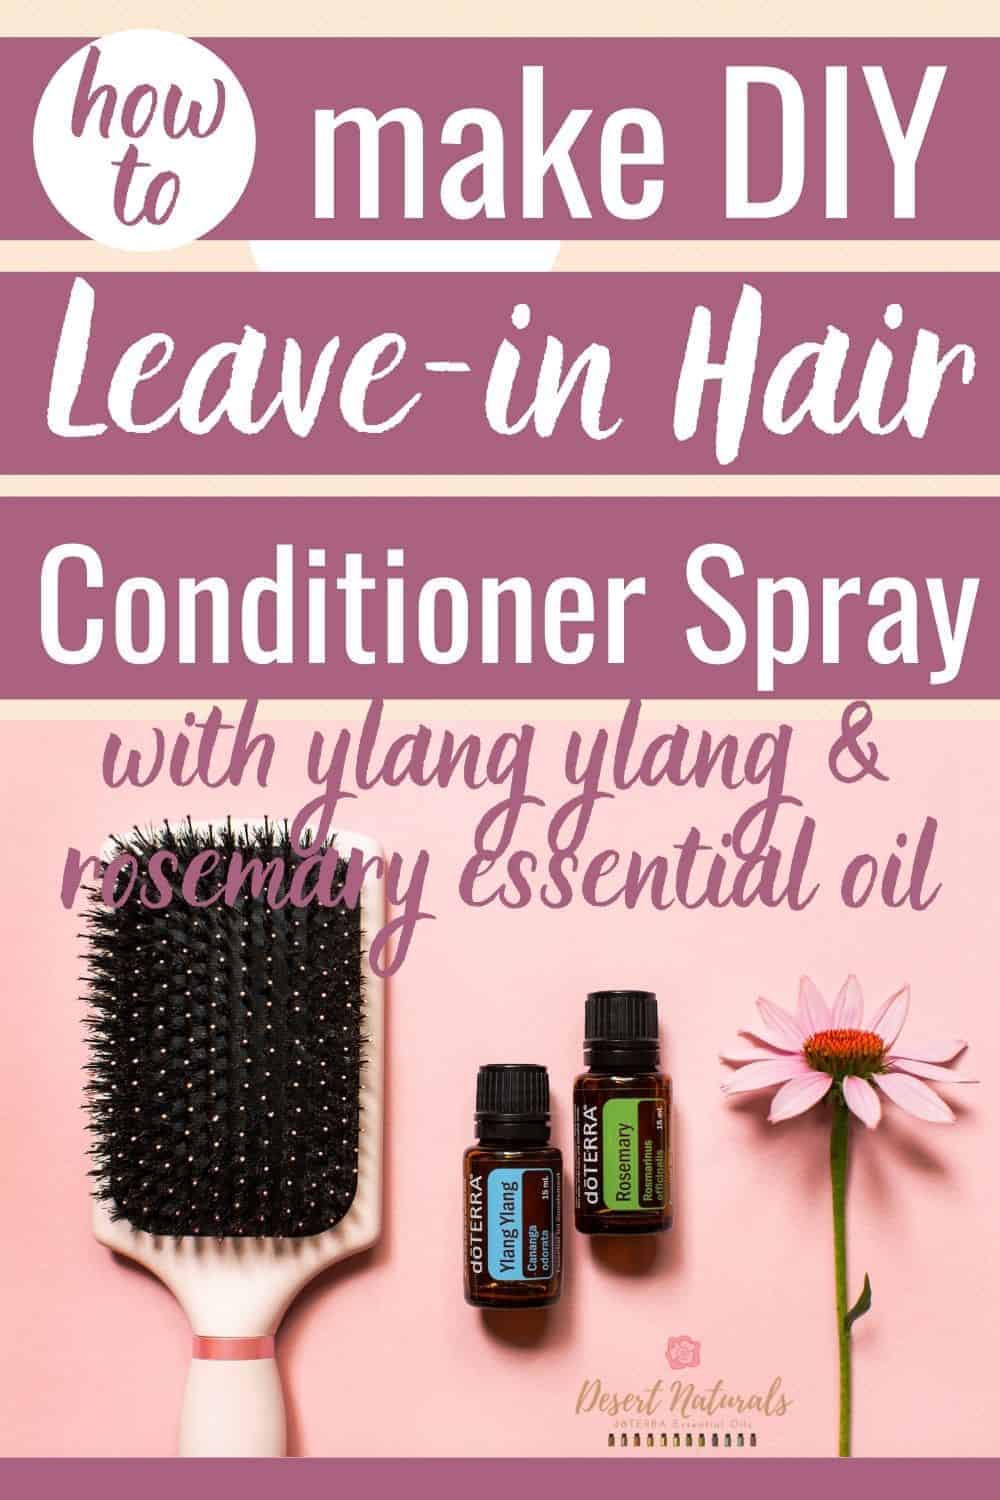 how to make homemade hair conditioner spray with ylang ylang and rosemary essential oils from doTERRA